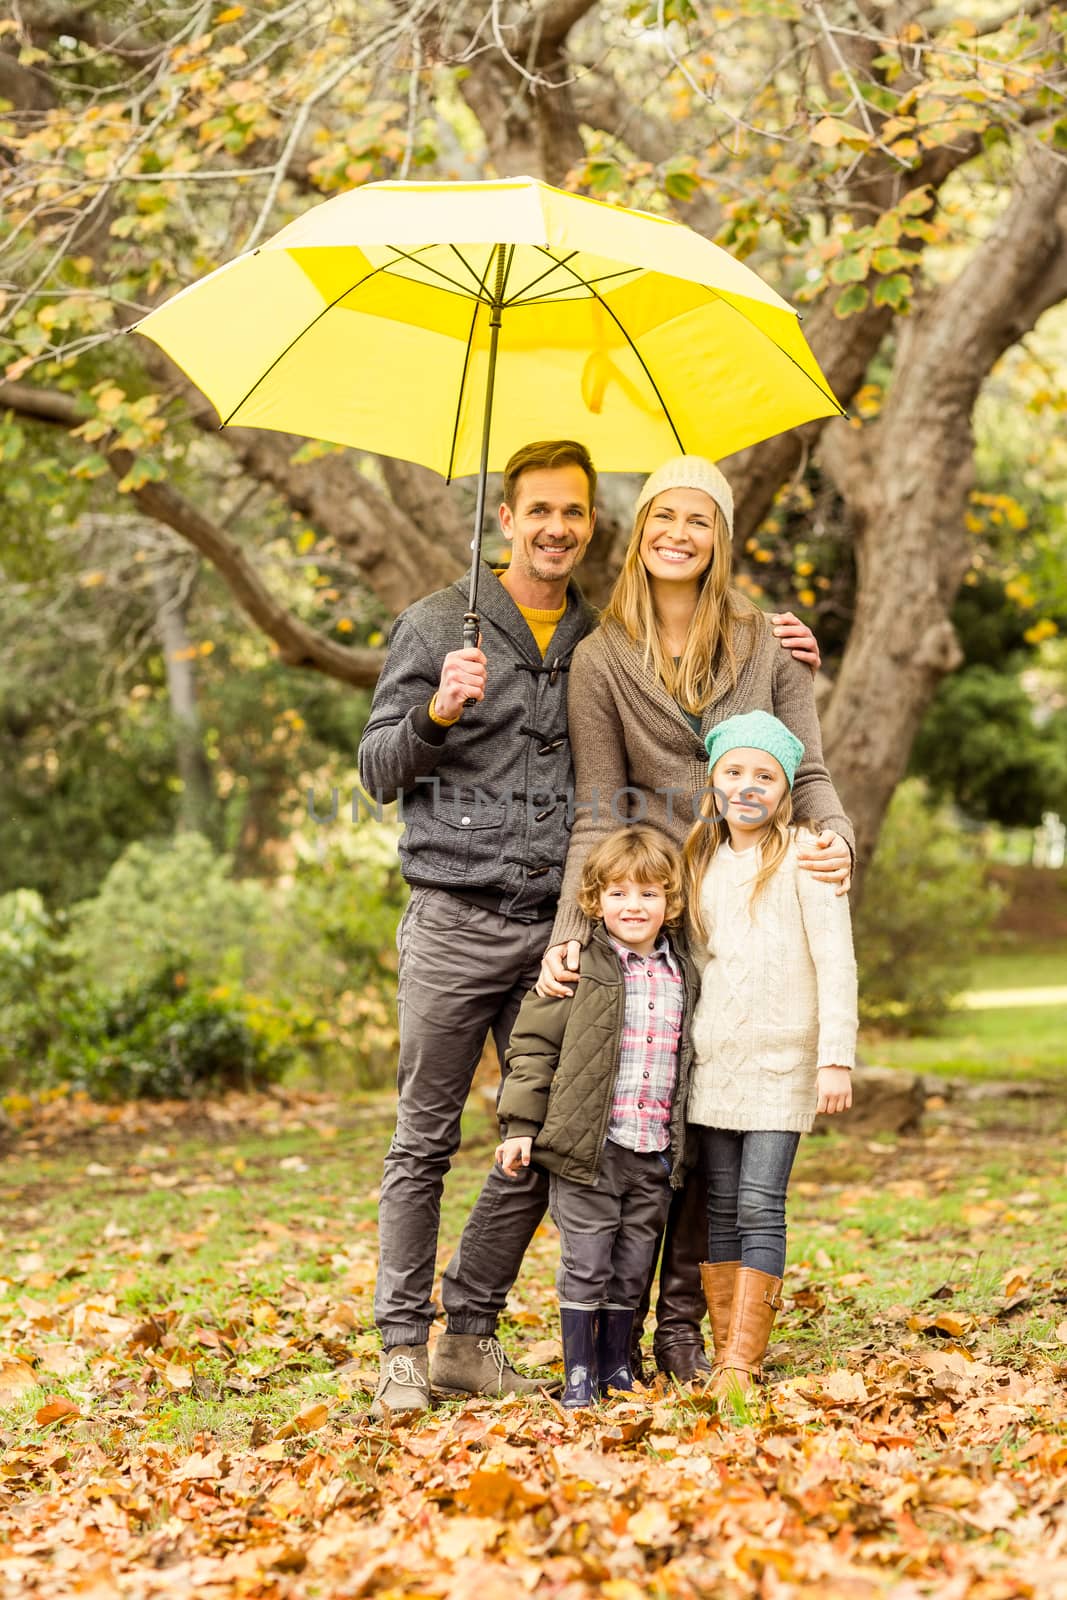 Smiling young family under umbrella by Wavebreakmedia